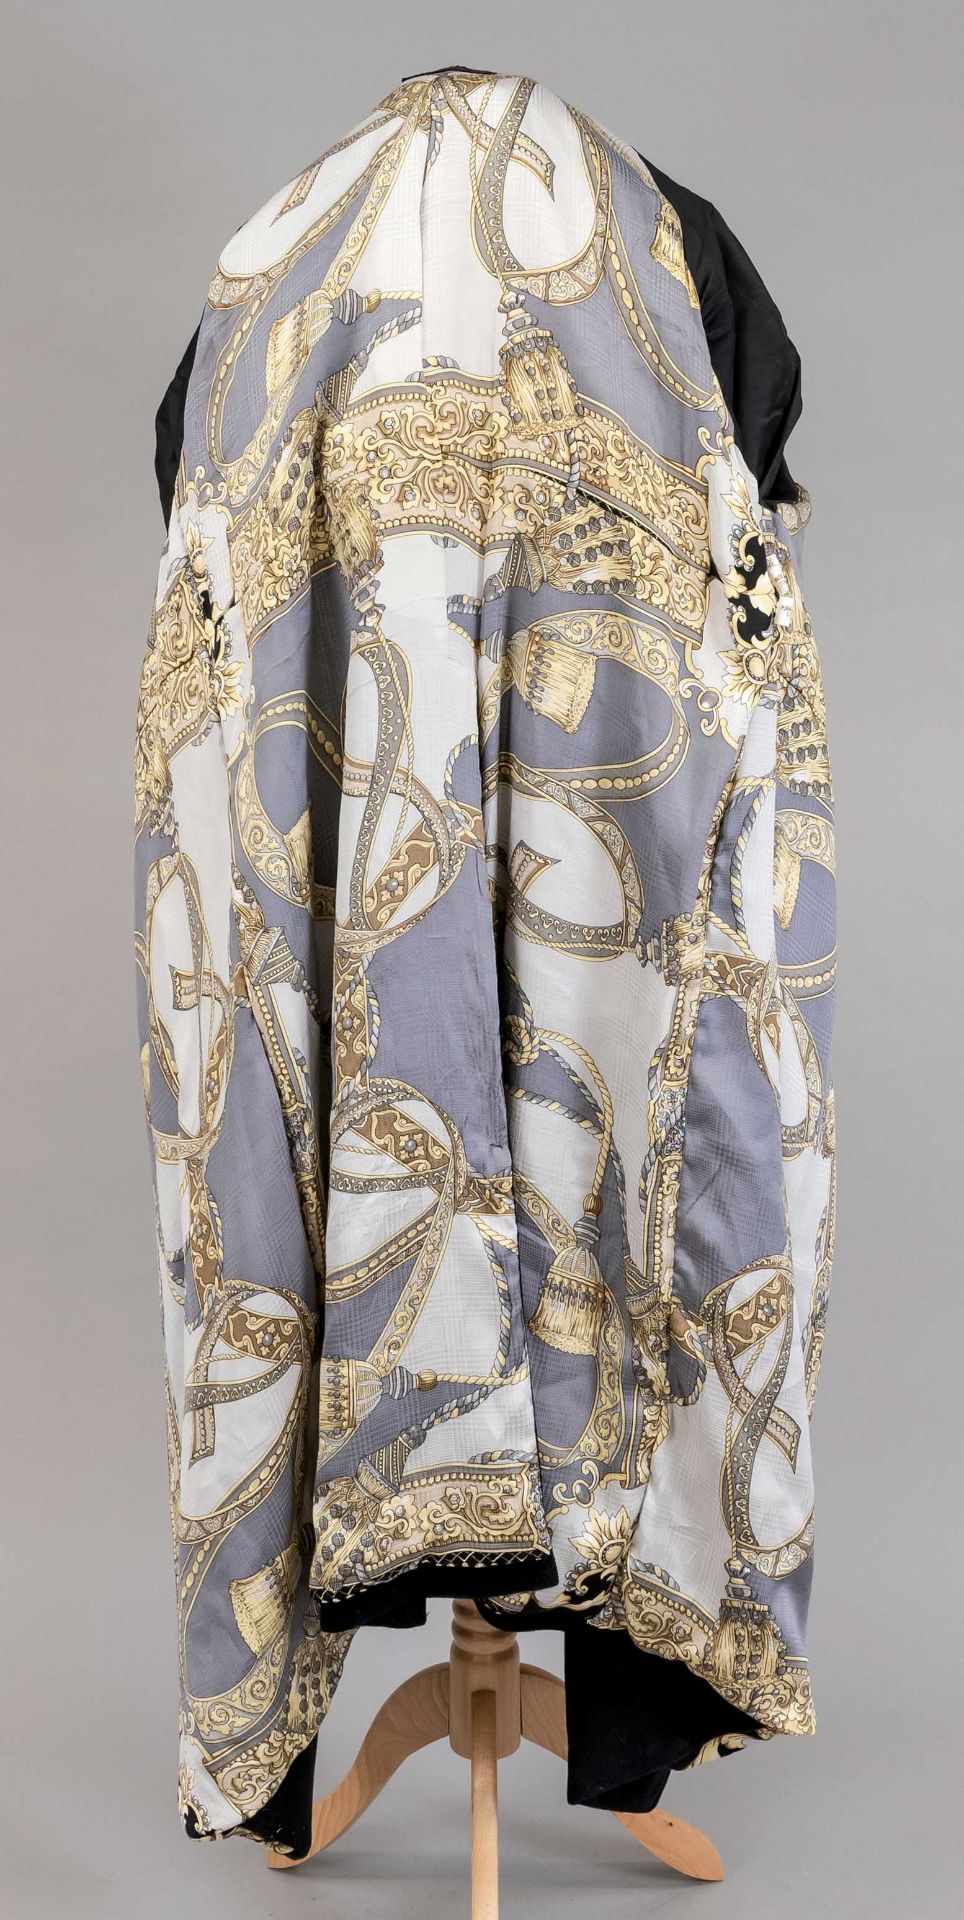 Unisex cashmere coat by Brioni, Italy, 2nd h. 20th c., Versace style silk lining, size 52, light - Image 3 of 3